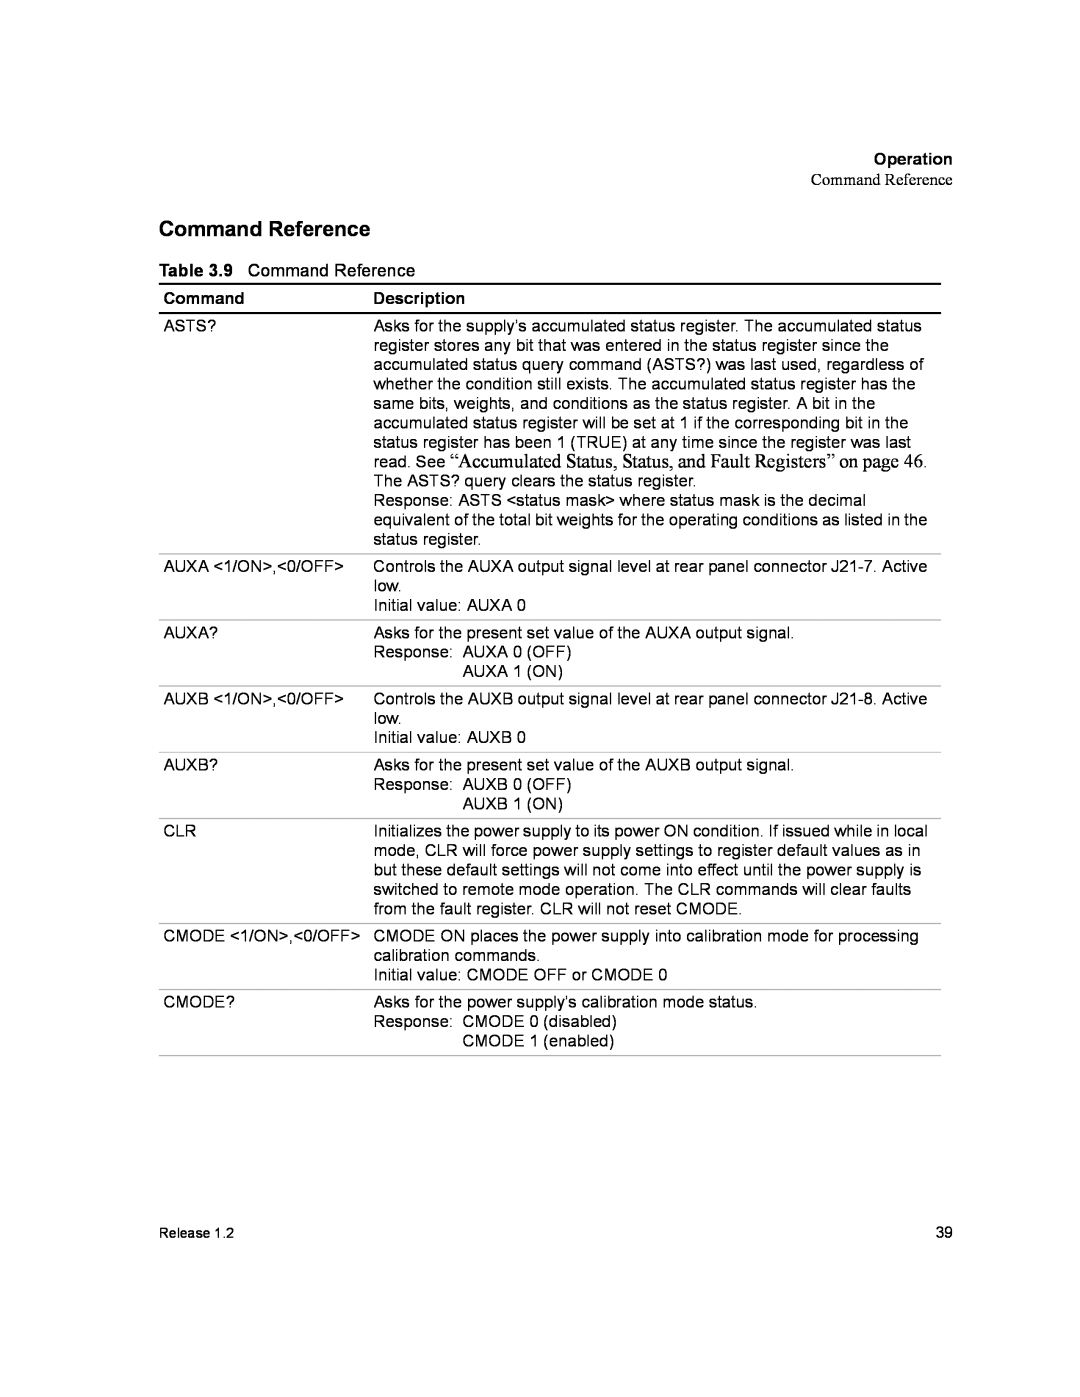 Xantrex Technology GPIB-XPD manual Command Reference, read. See “Accumulated Status, Status, and Fault Registers” on page 